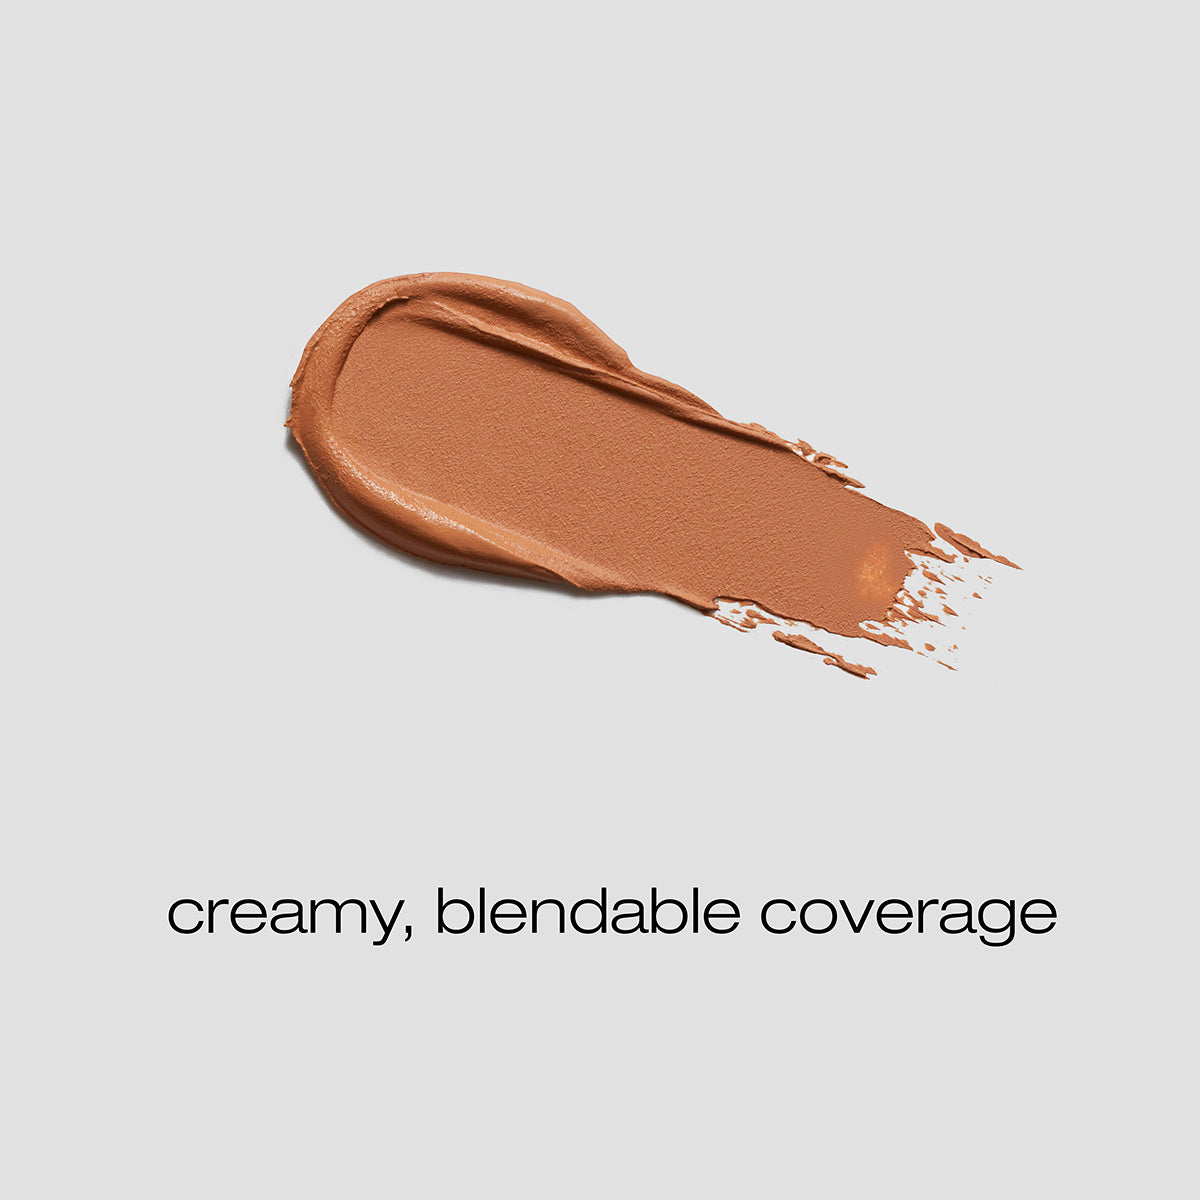 Spread of the Toffee concealer with description of creamy, blendable coverage